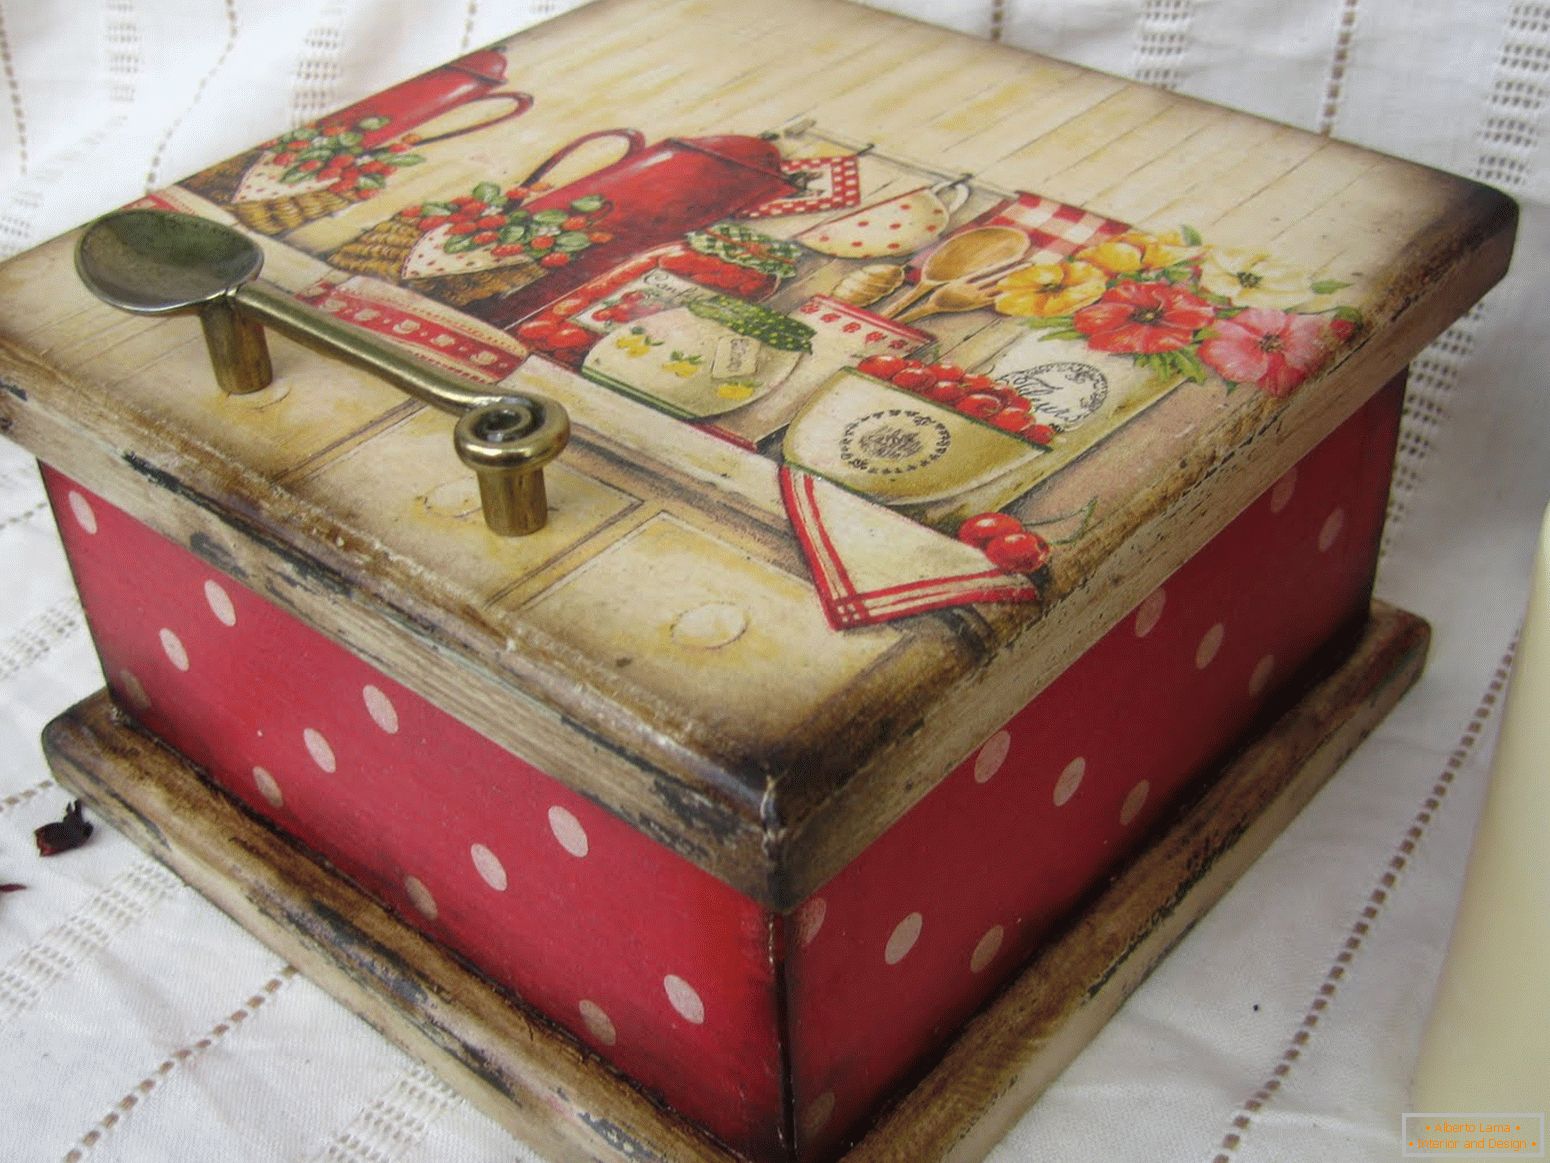 Decoration of a self-made box by decoupage